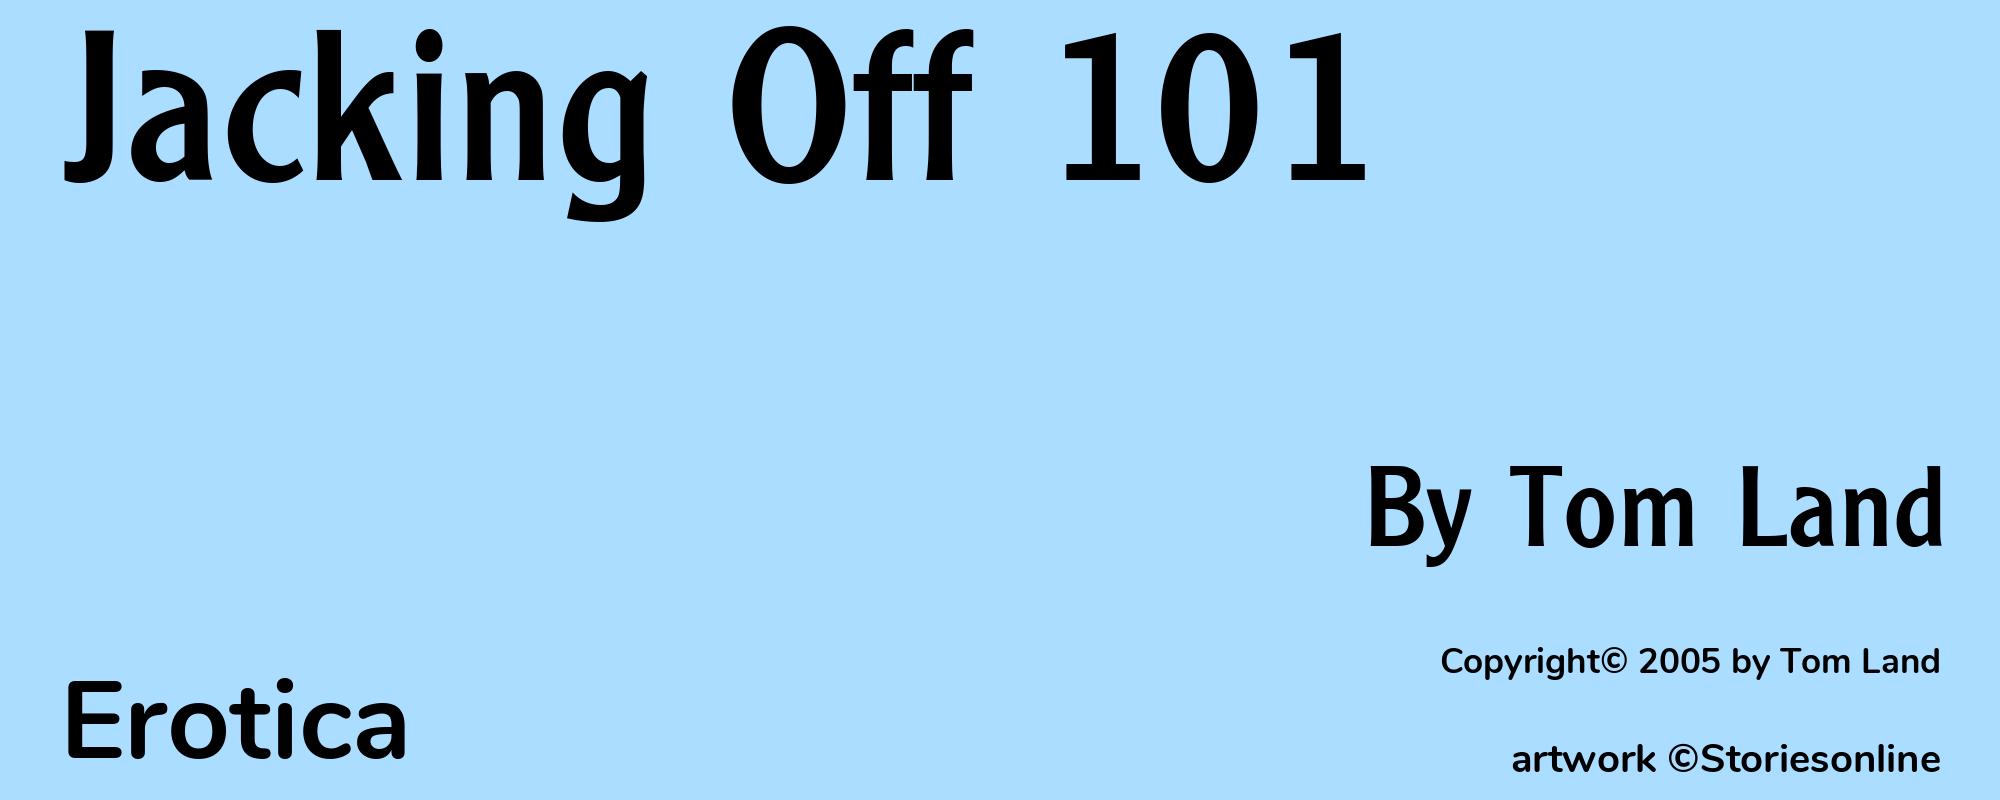 Jacking Off 101 - Cover